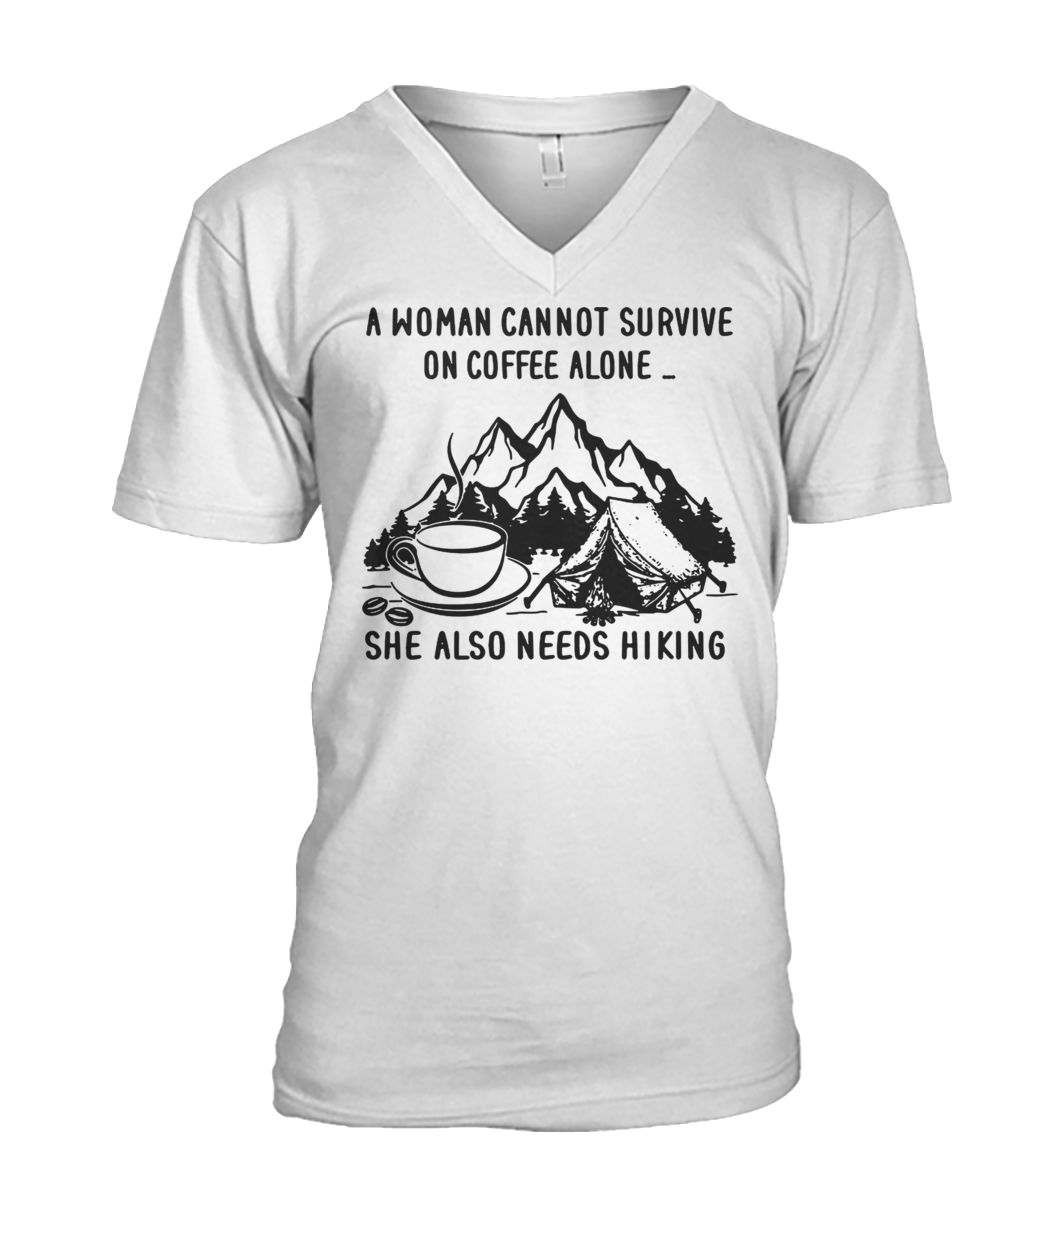 A woman cannot survive on coffee alone she also needs hiking mens v-neck